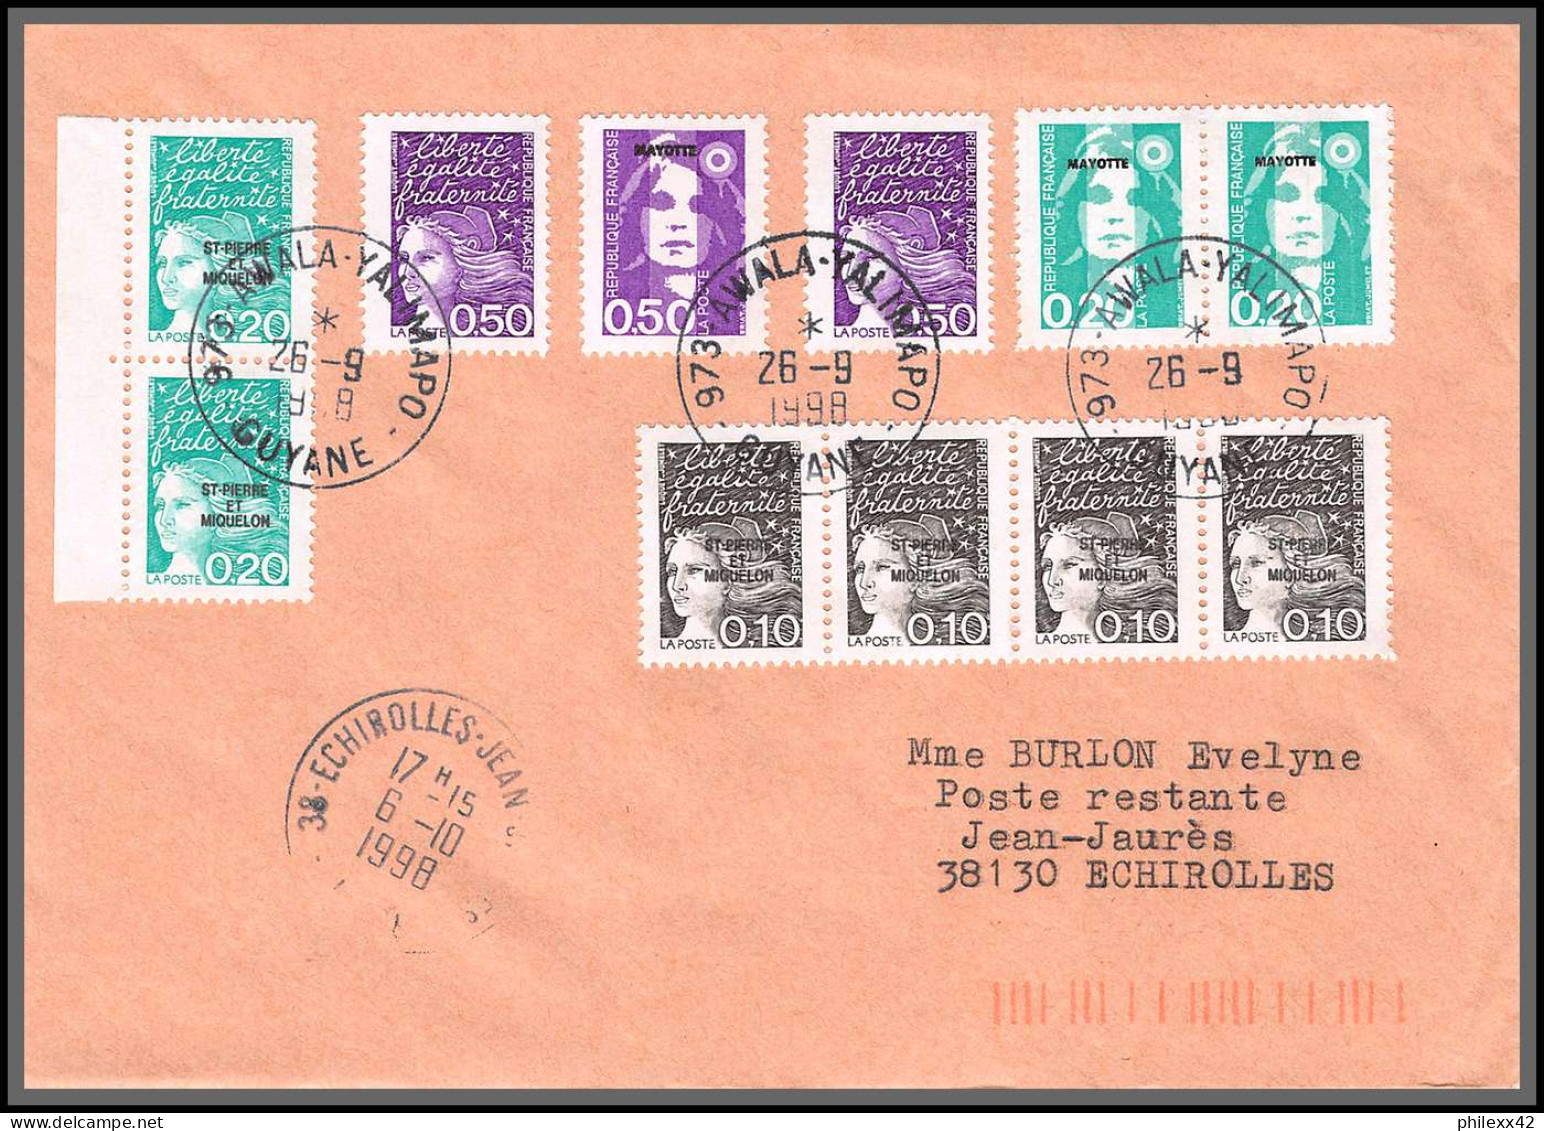 74475 Mixte Briat Luquet Mayotte St Pierre 26/9/1998 Awala-Yalimapo Griffe Guyane Echirolles Isère Lettre Cover Colonies - 1997-2004 Marianna Del 14 Luglio